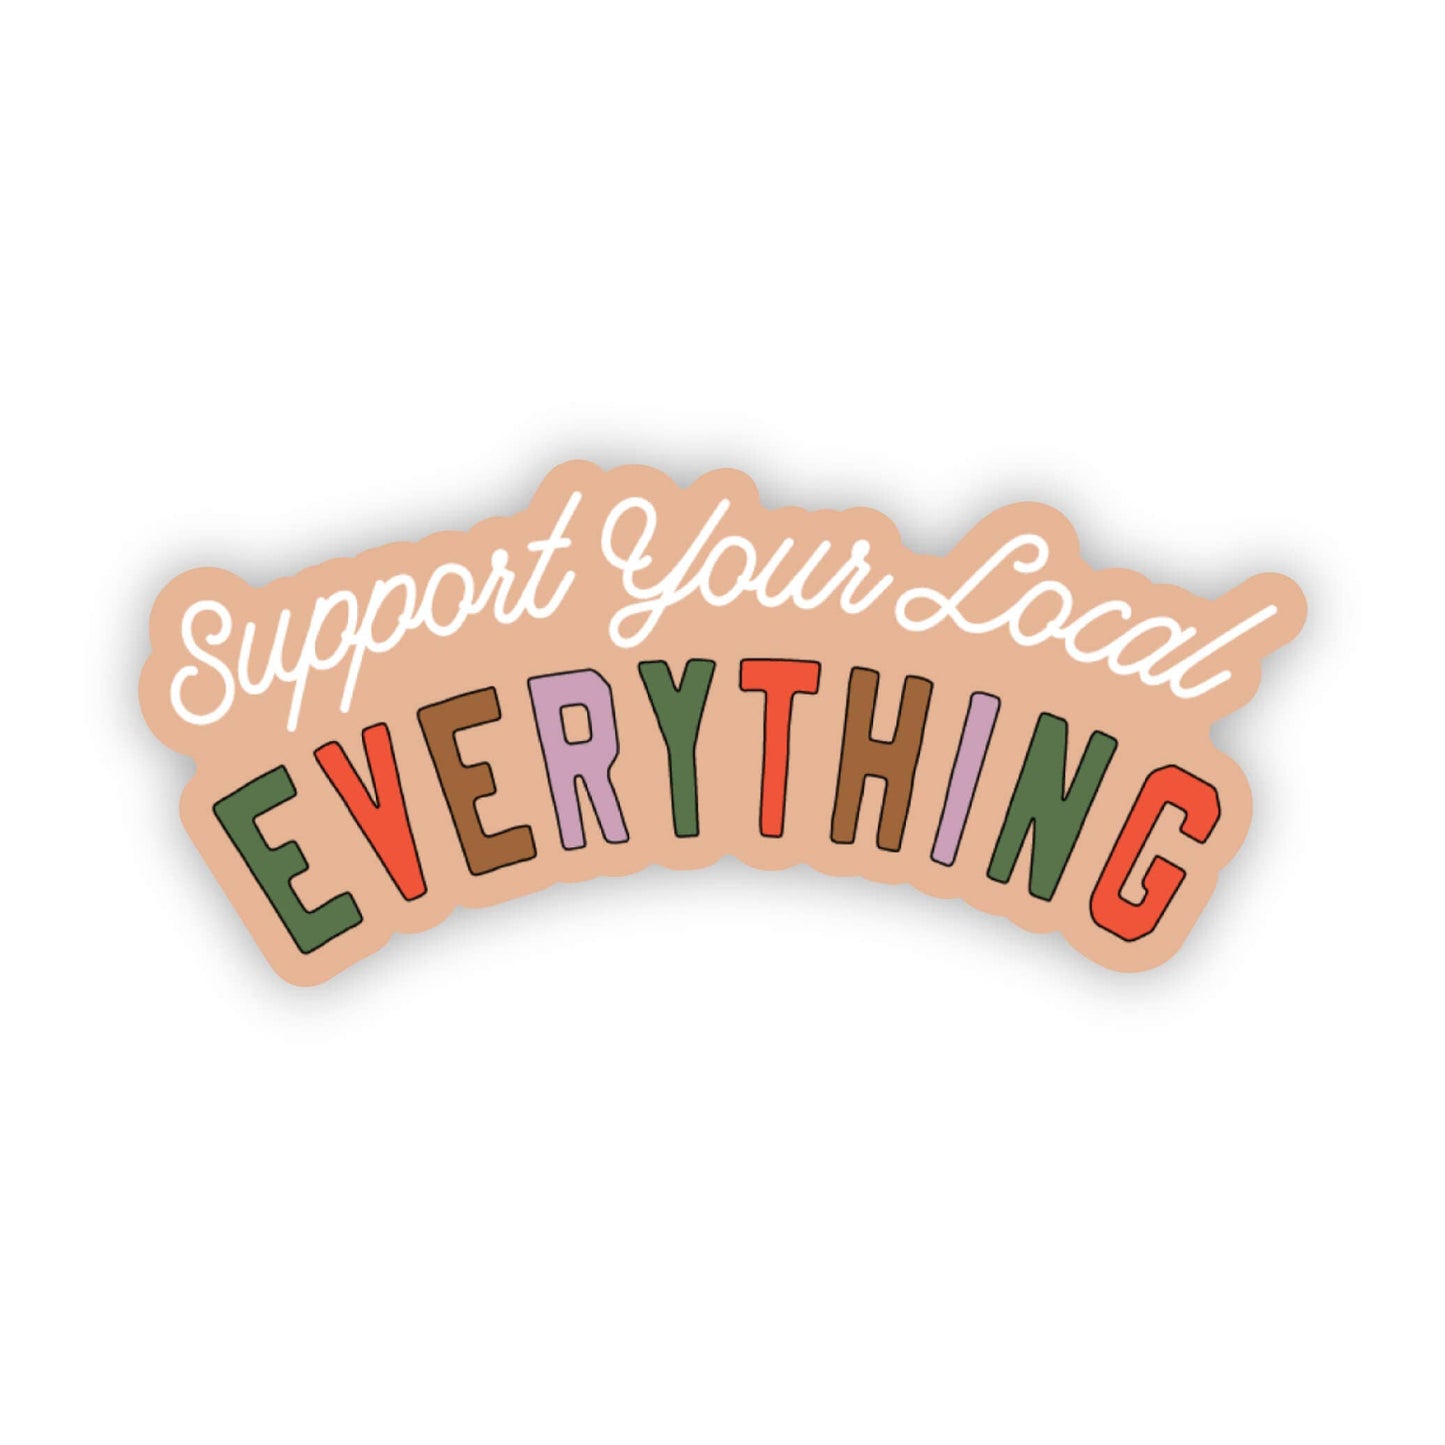 Support Your Local Everything Sticker